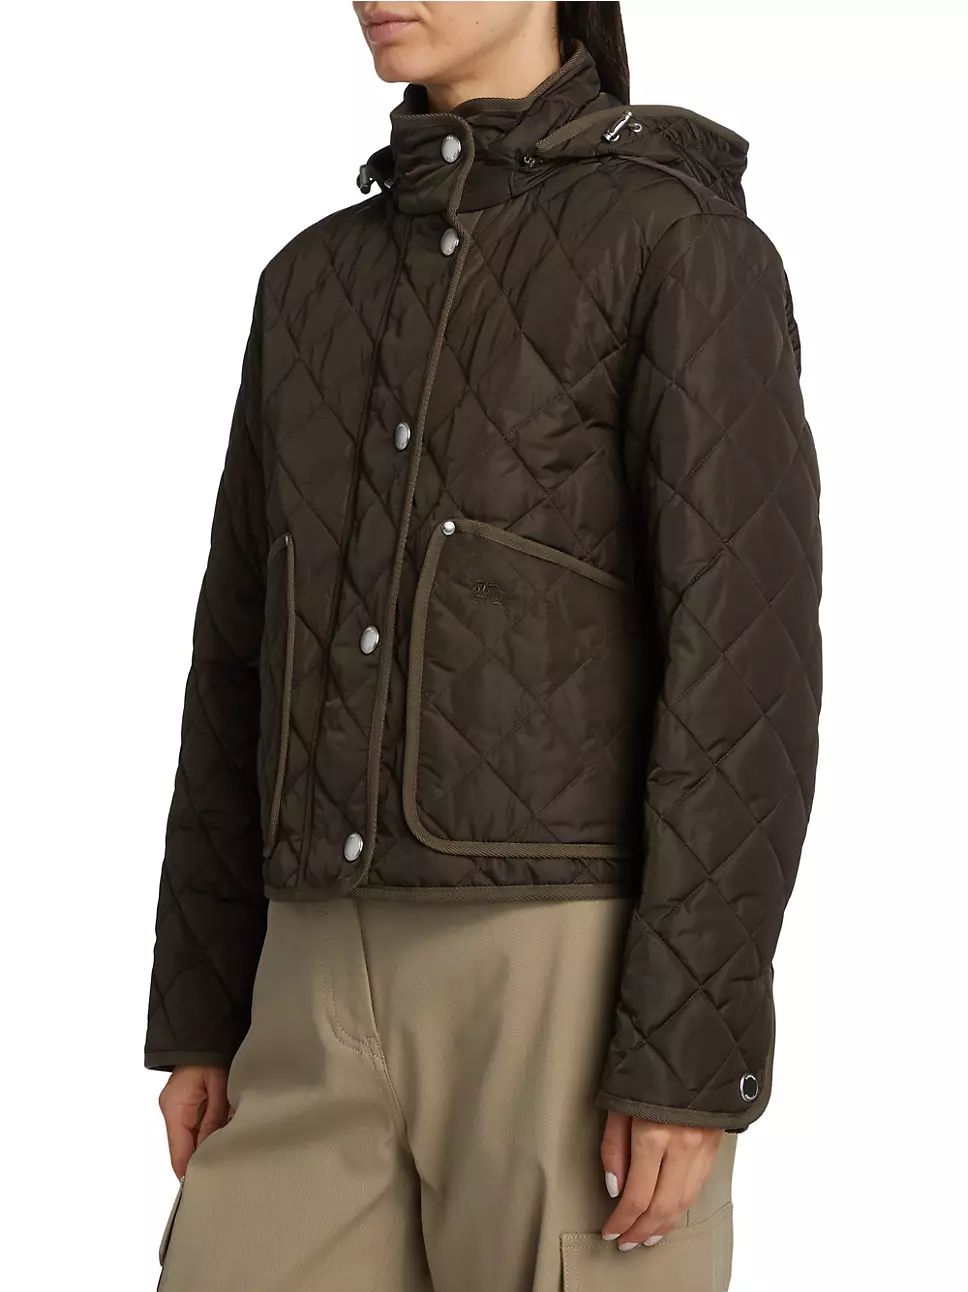 Burberry Diamond Quilted Crop Jacket | Saks Fifth Avenue